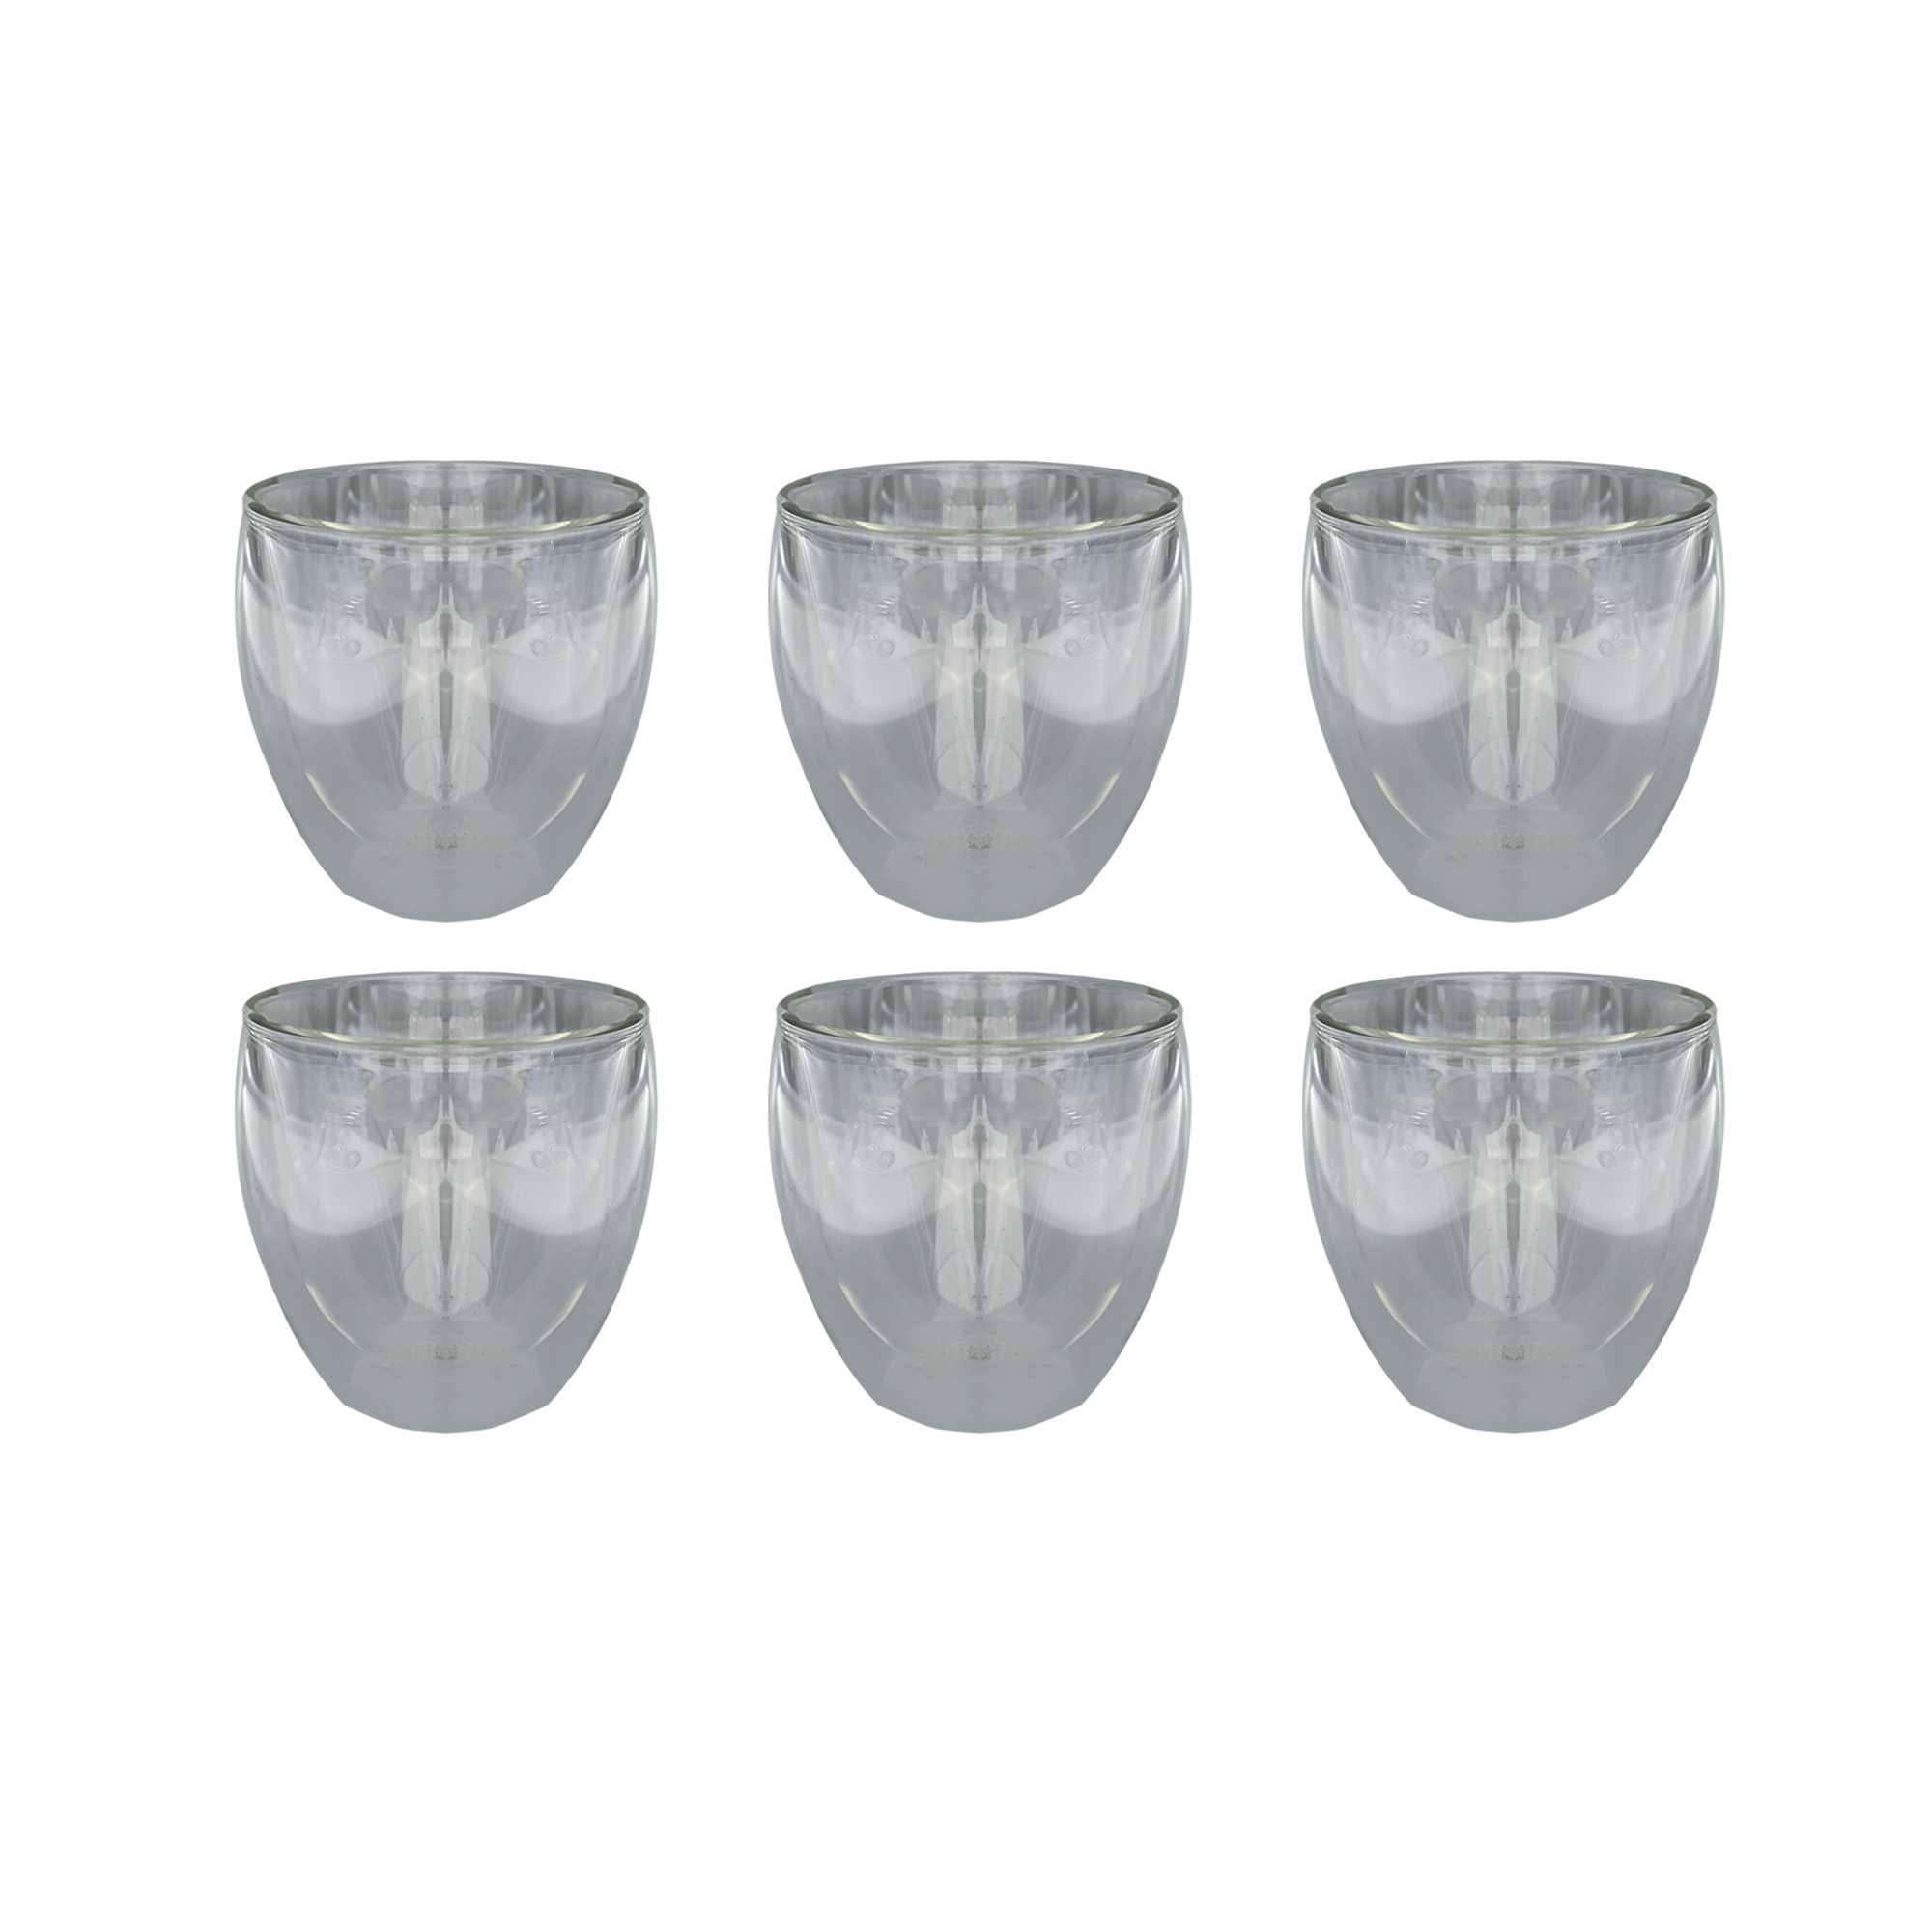 Oval Shape Glass cup set of 6 pieces, tea cup / wine glass / drink cup/ milk cup/ water cup, Capacity: 200ML Size: 62*88mm, Clear and Transparent.